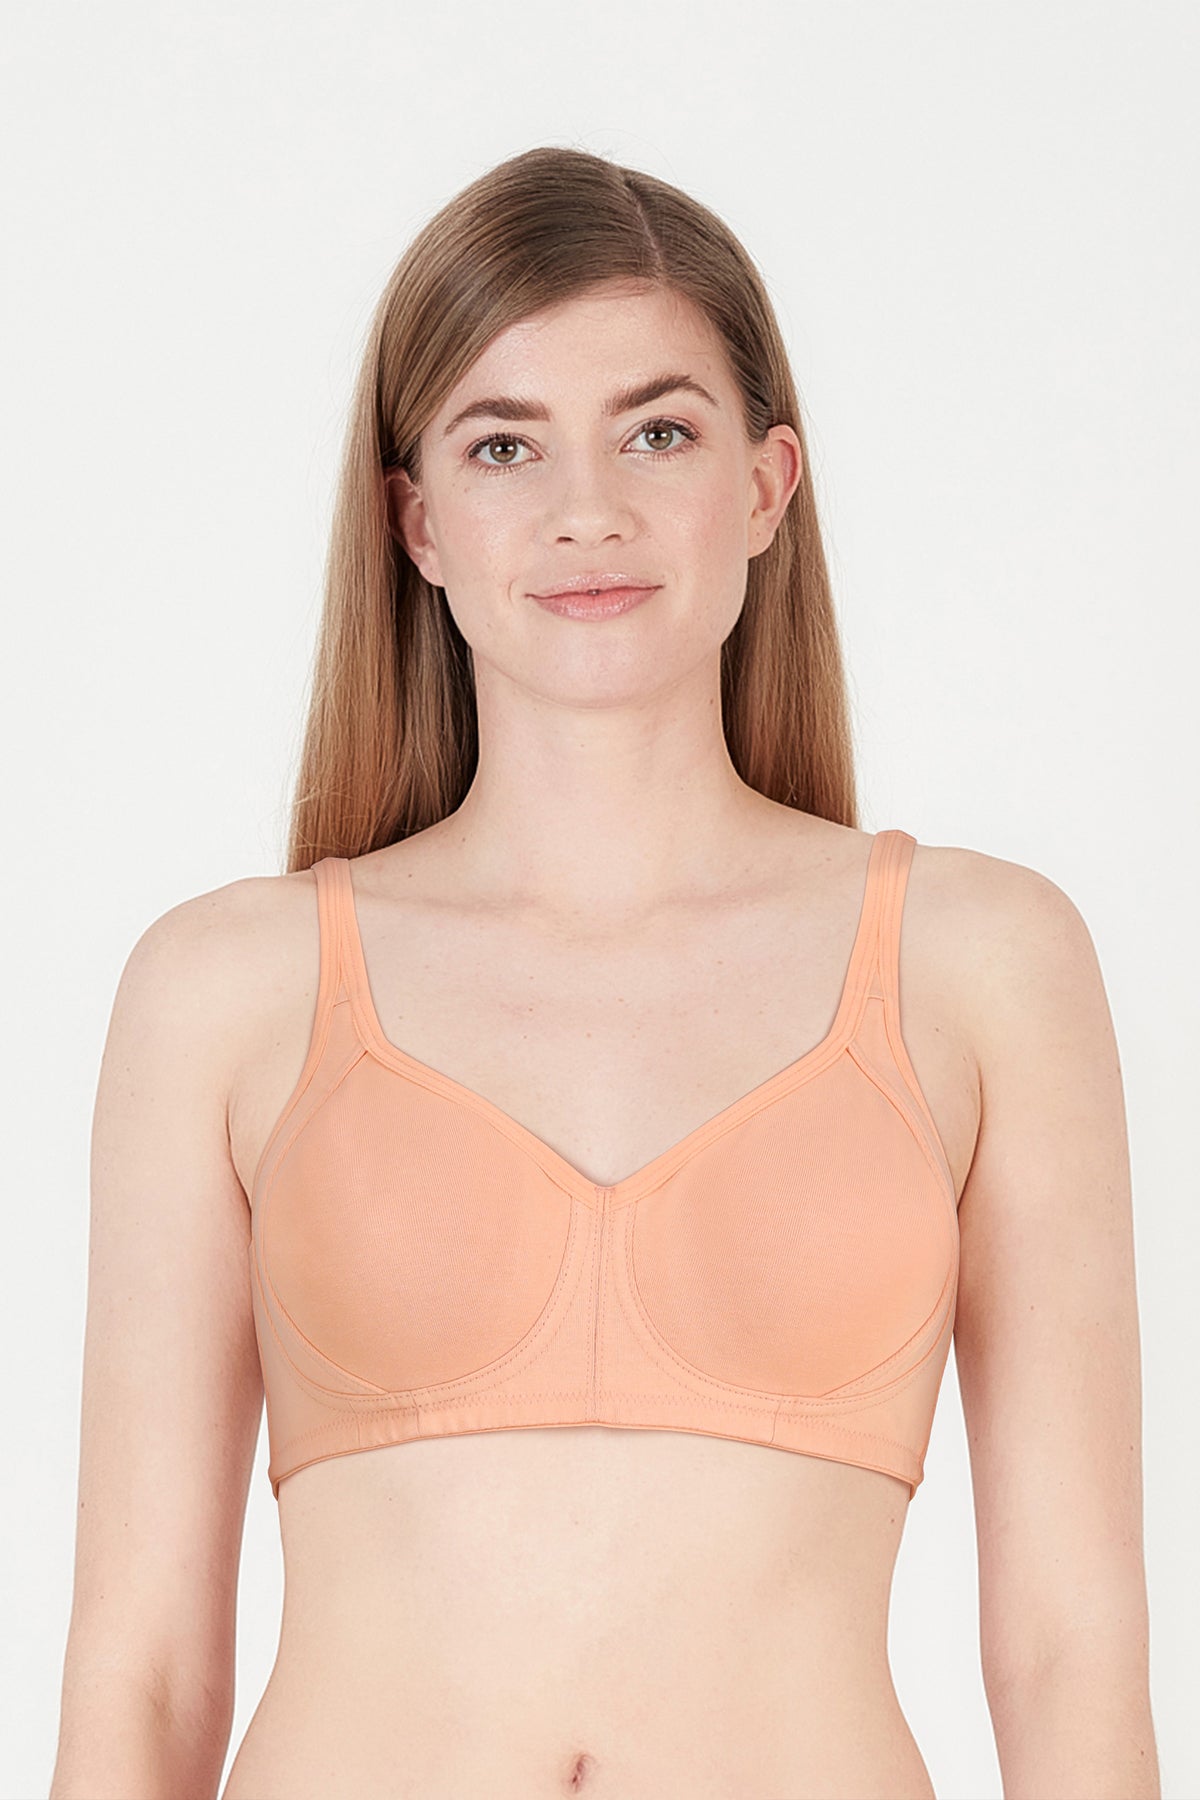 BLS - Calantha Non Wired And Non Padded Cotton Bra - Salmon